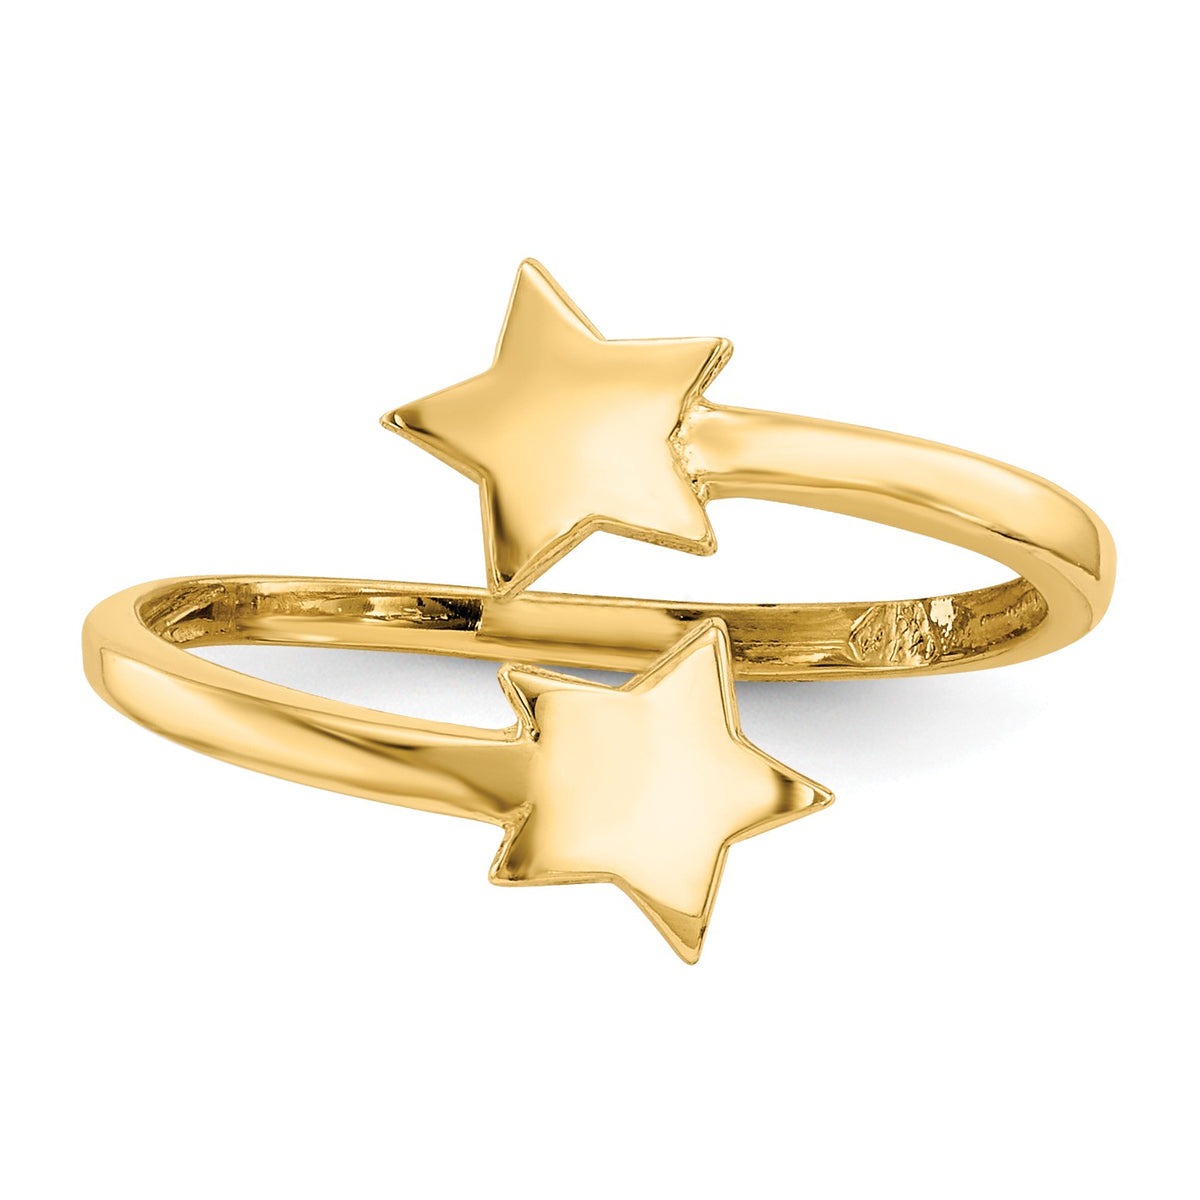 Alternate view of the Star Toe Ring in 14 Karat Gold by The Black Bow Jewelry Co.